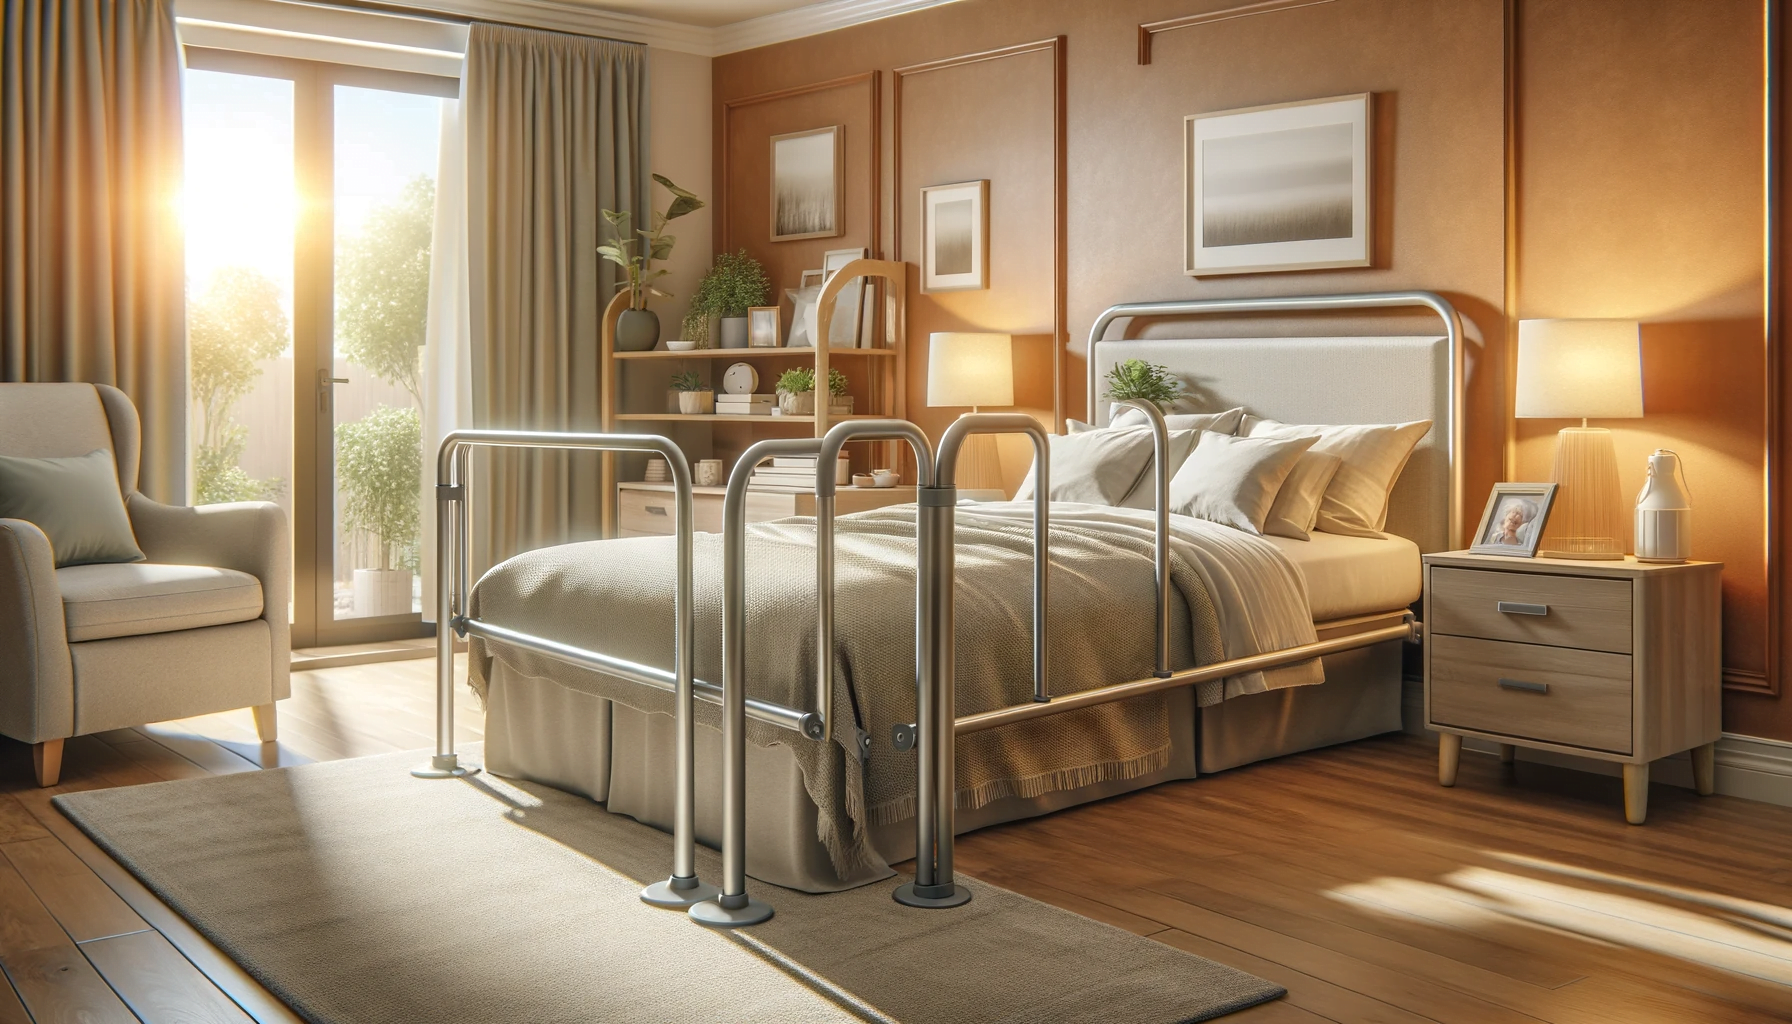 How to Install Senior Bed Rails